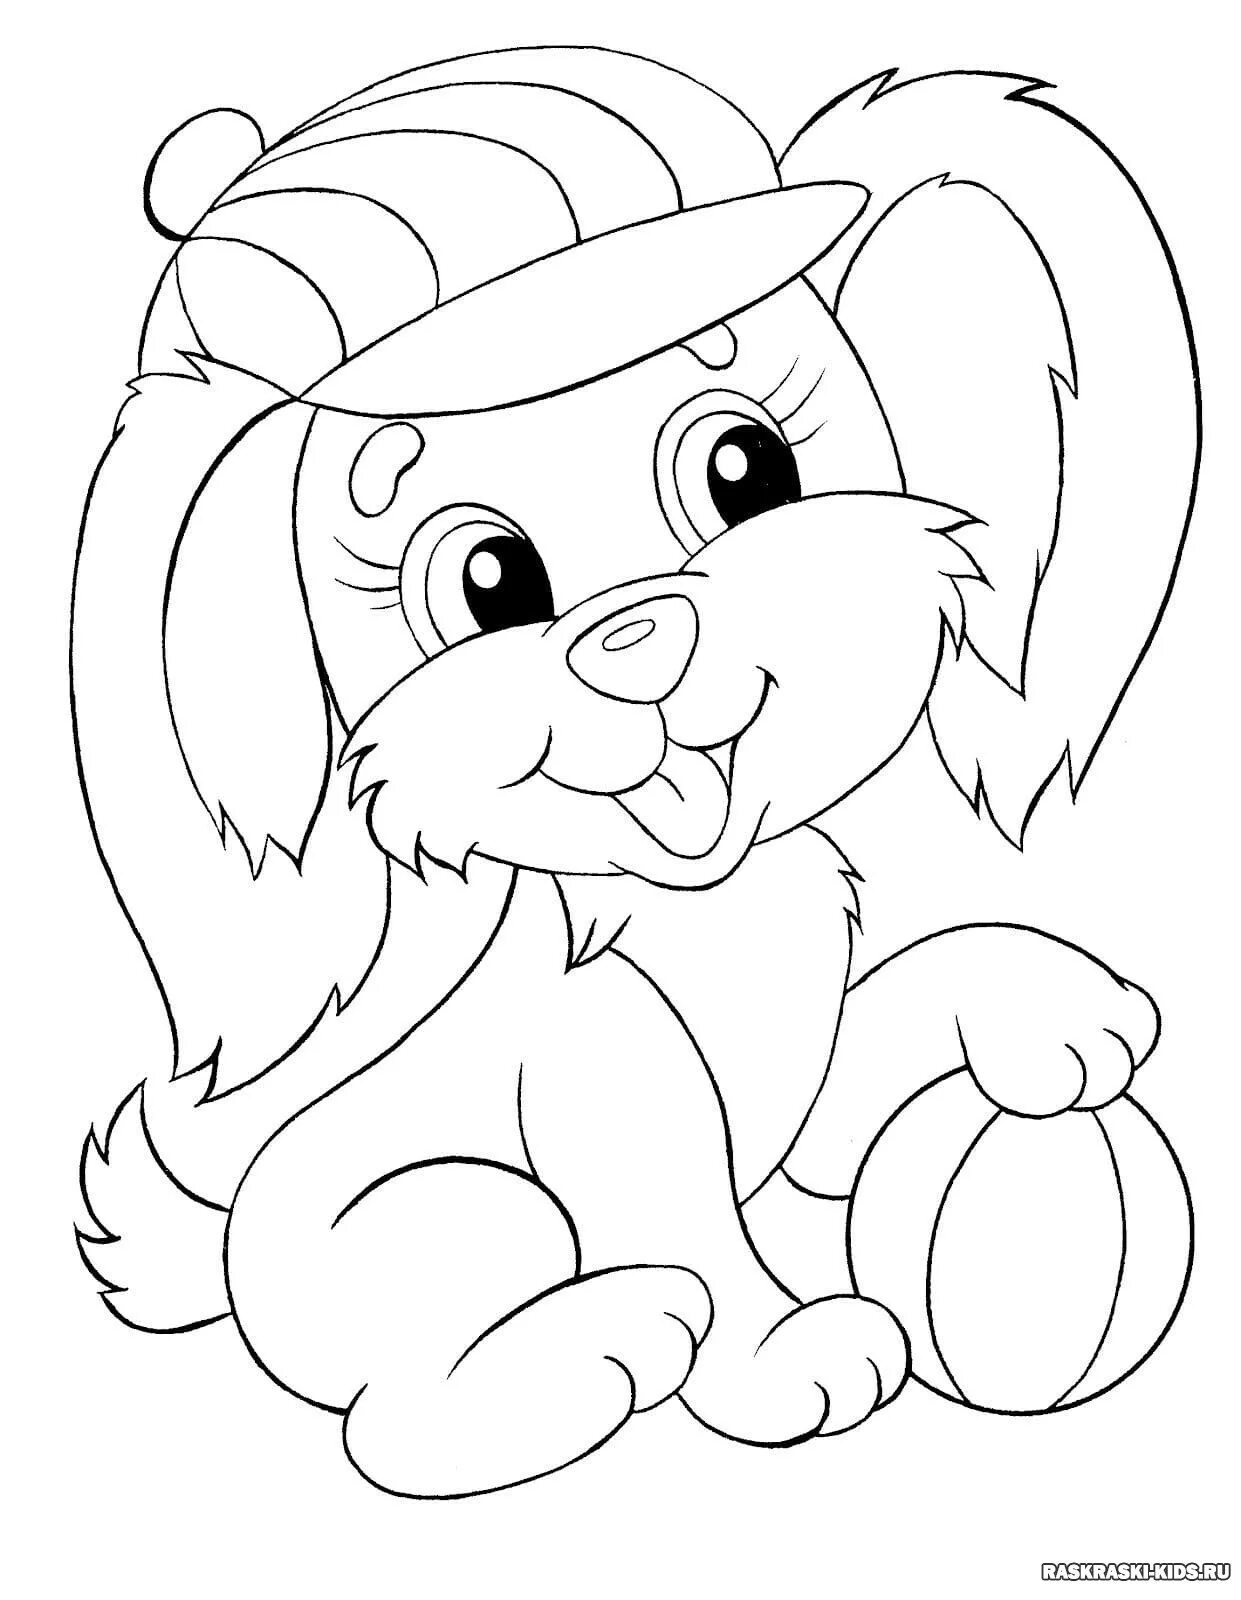 Cool animal coloring pages for girls